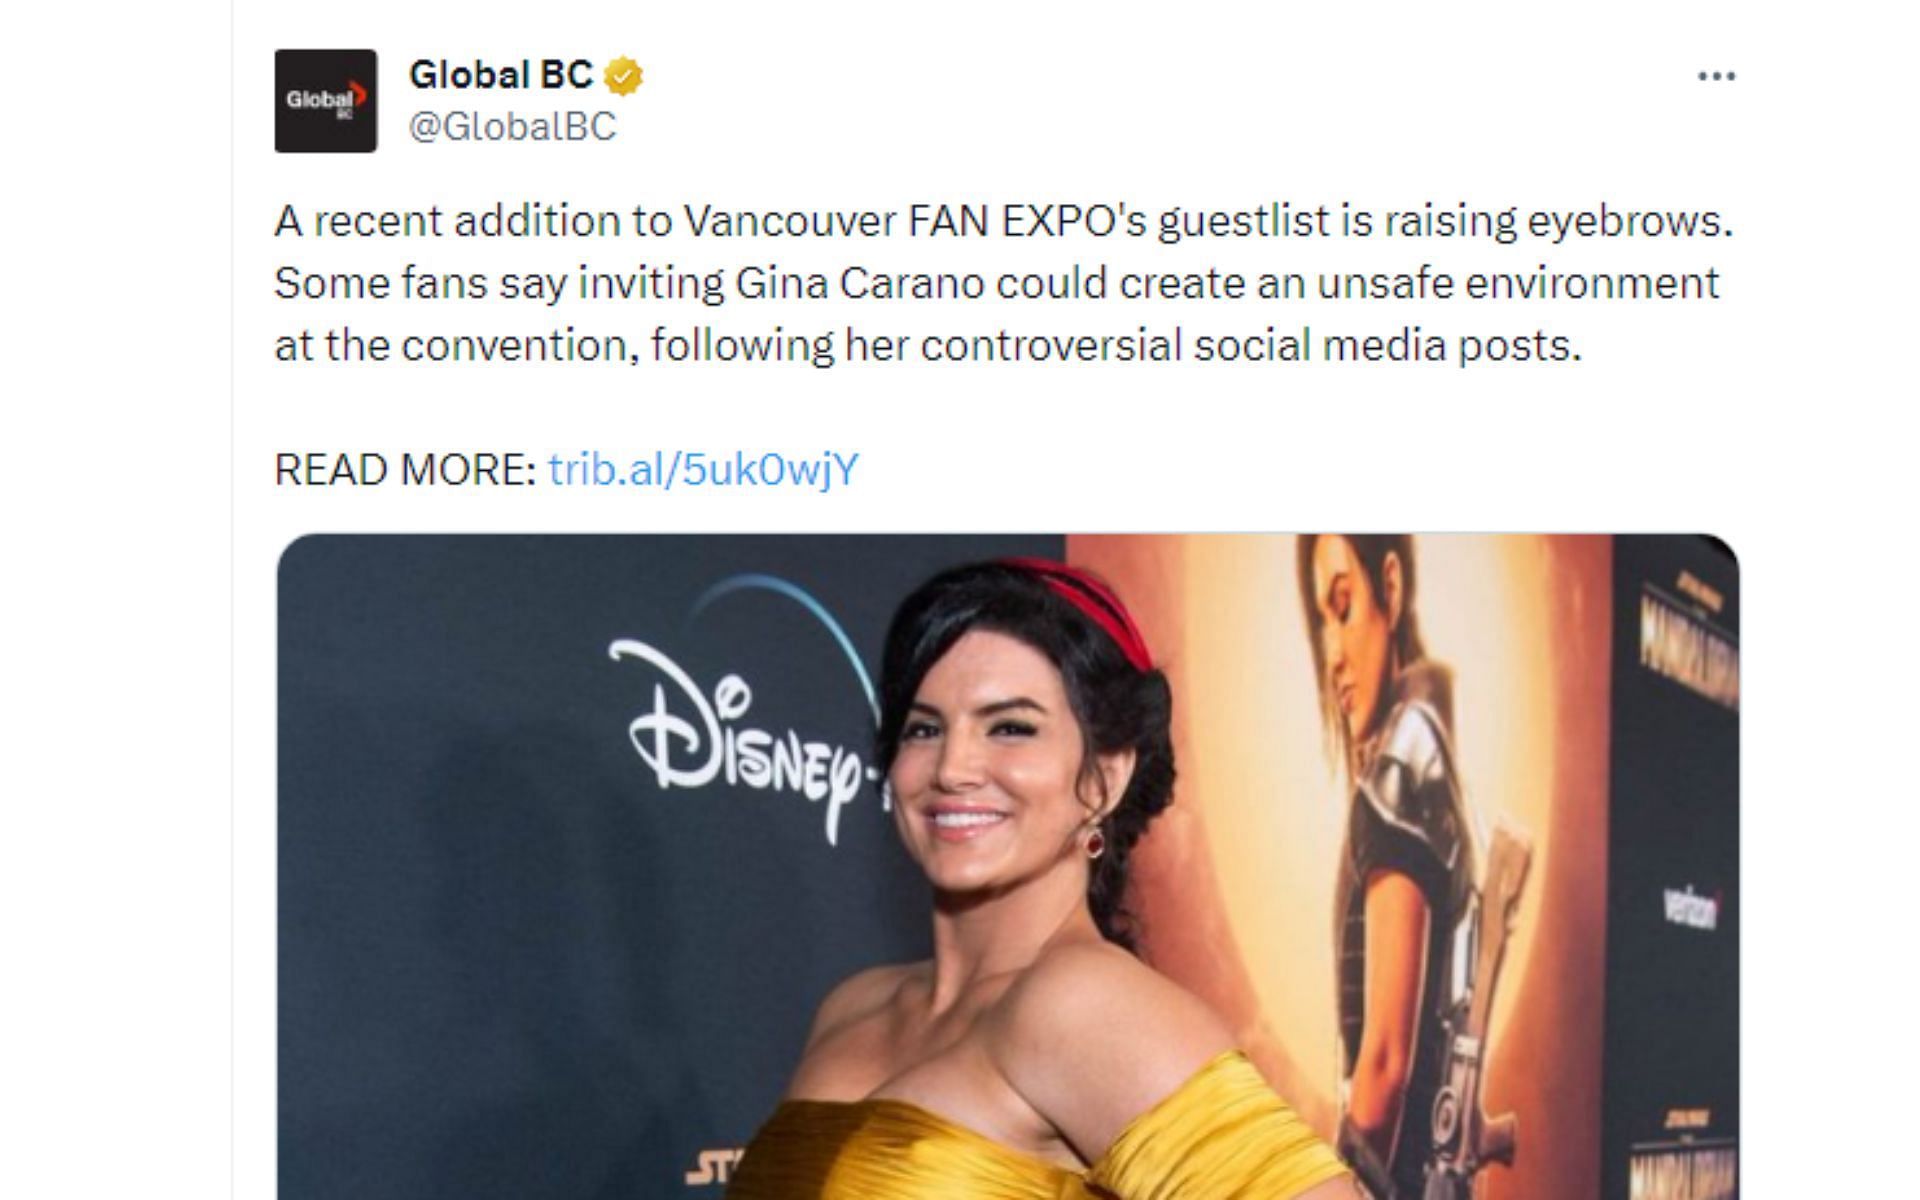 Tweet regarding Carano appearing at Vancouver Fan Expo [Image courtesy: @GlobalBC - X]